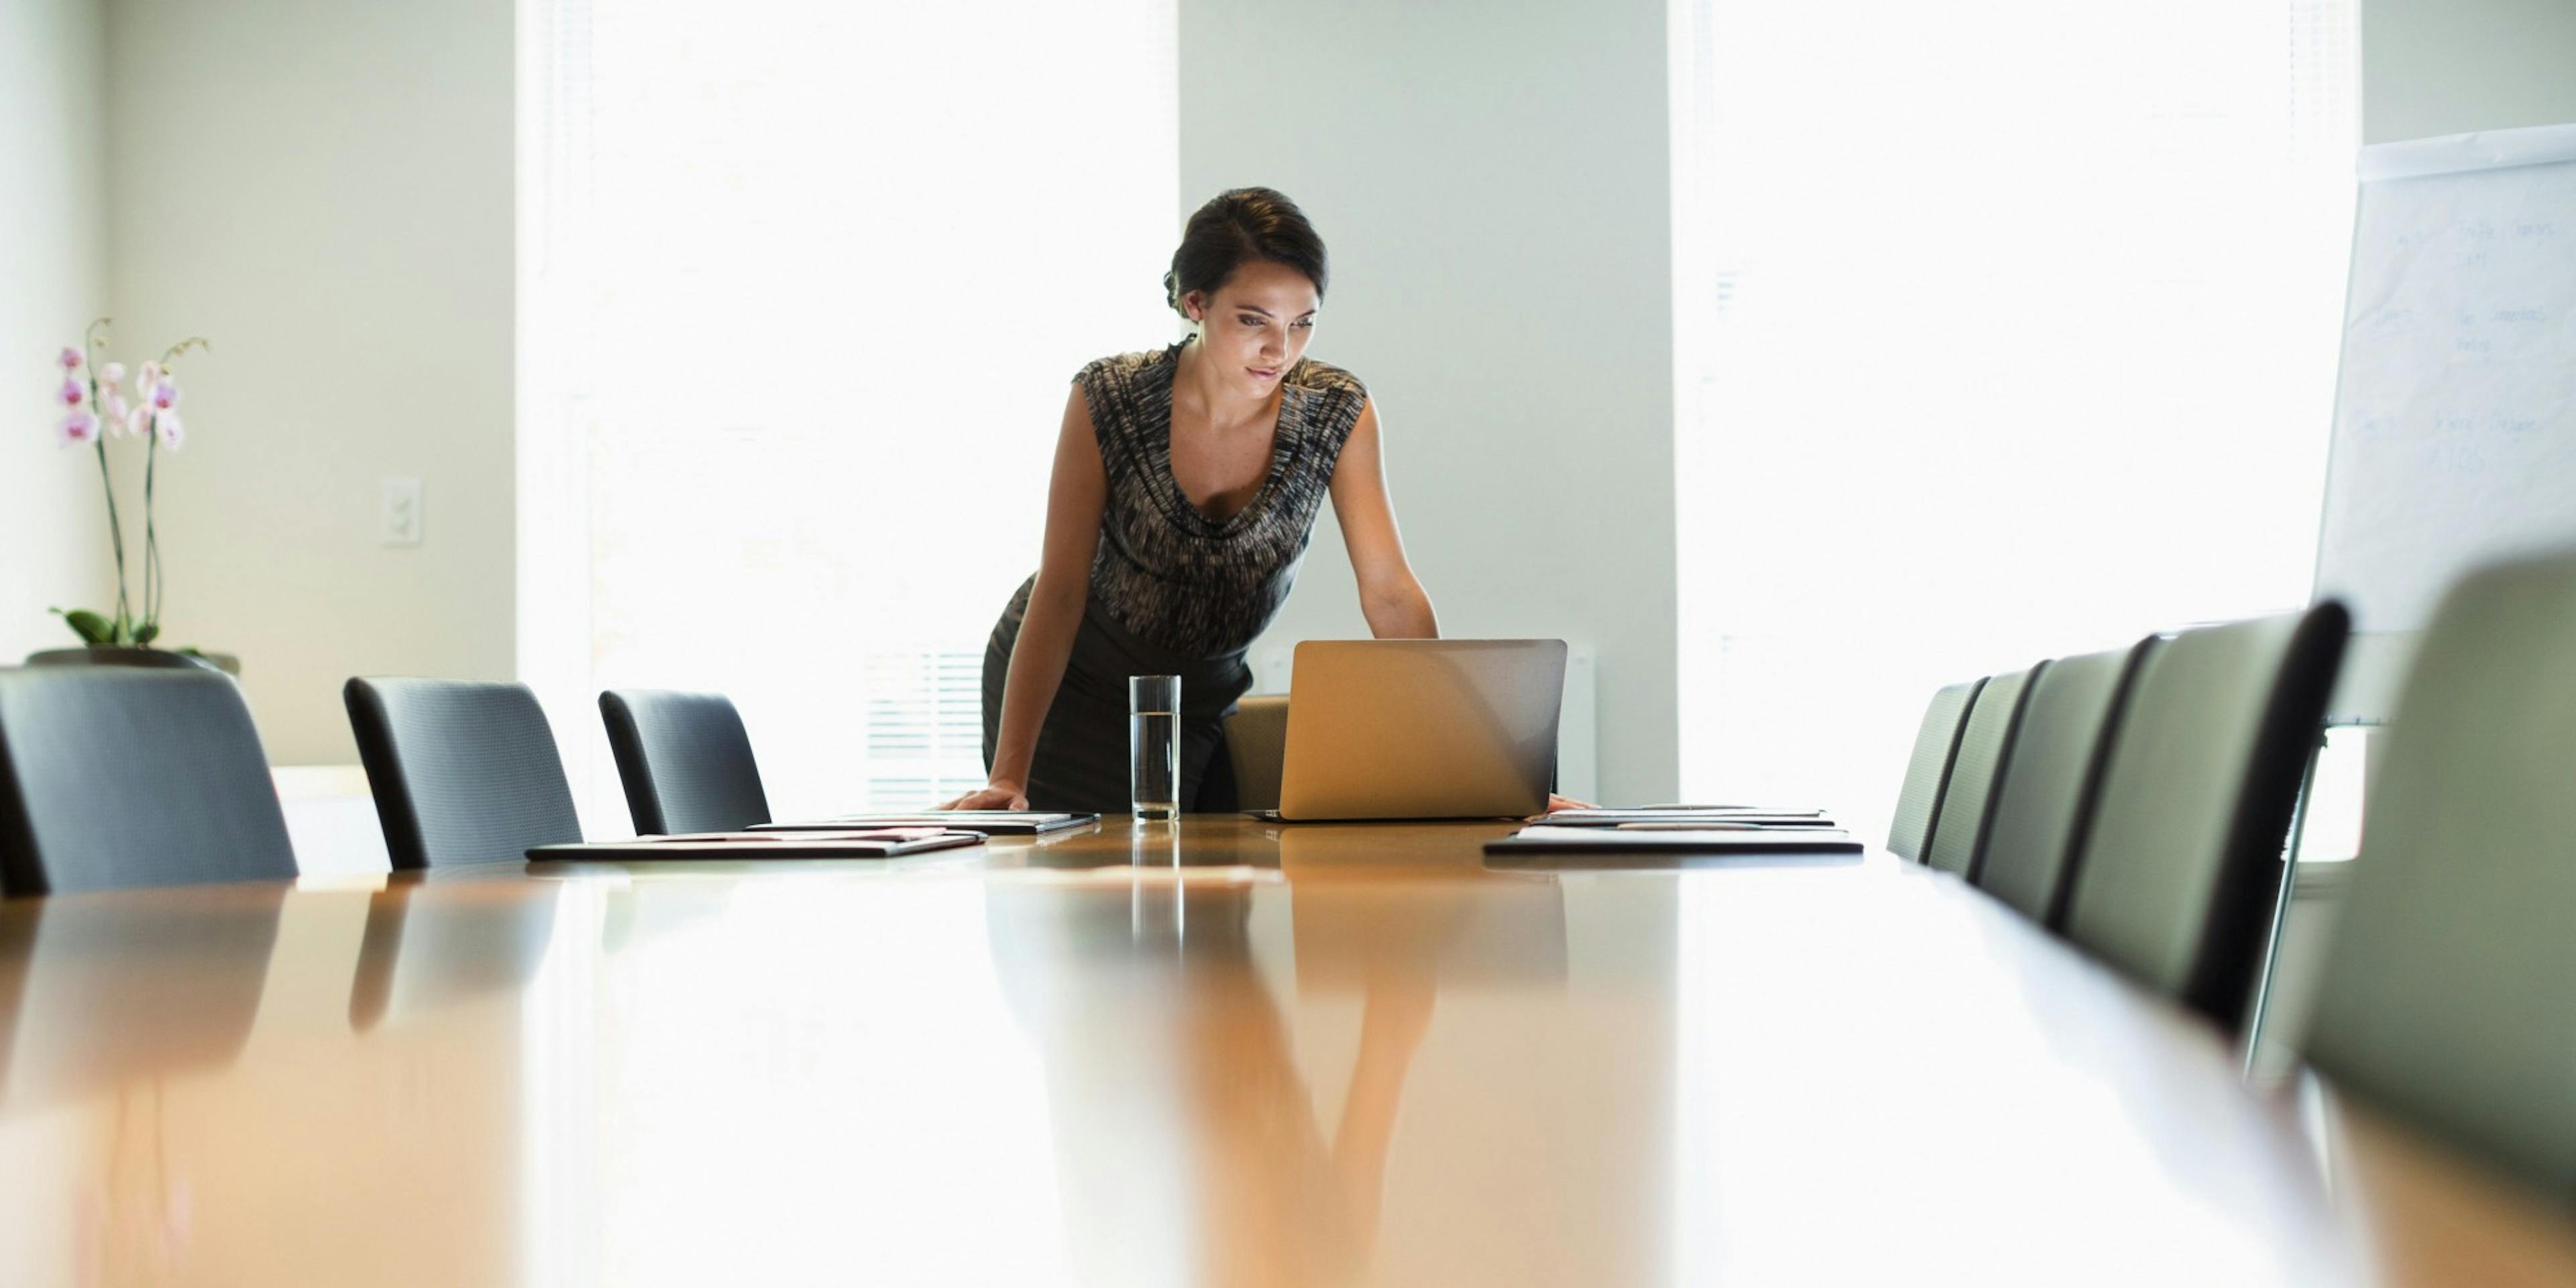 featured image - Women In The Boardroom and Silicon Hypocrisy